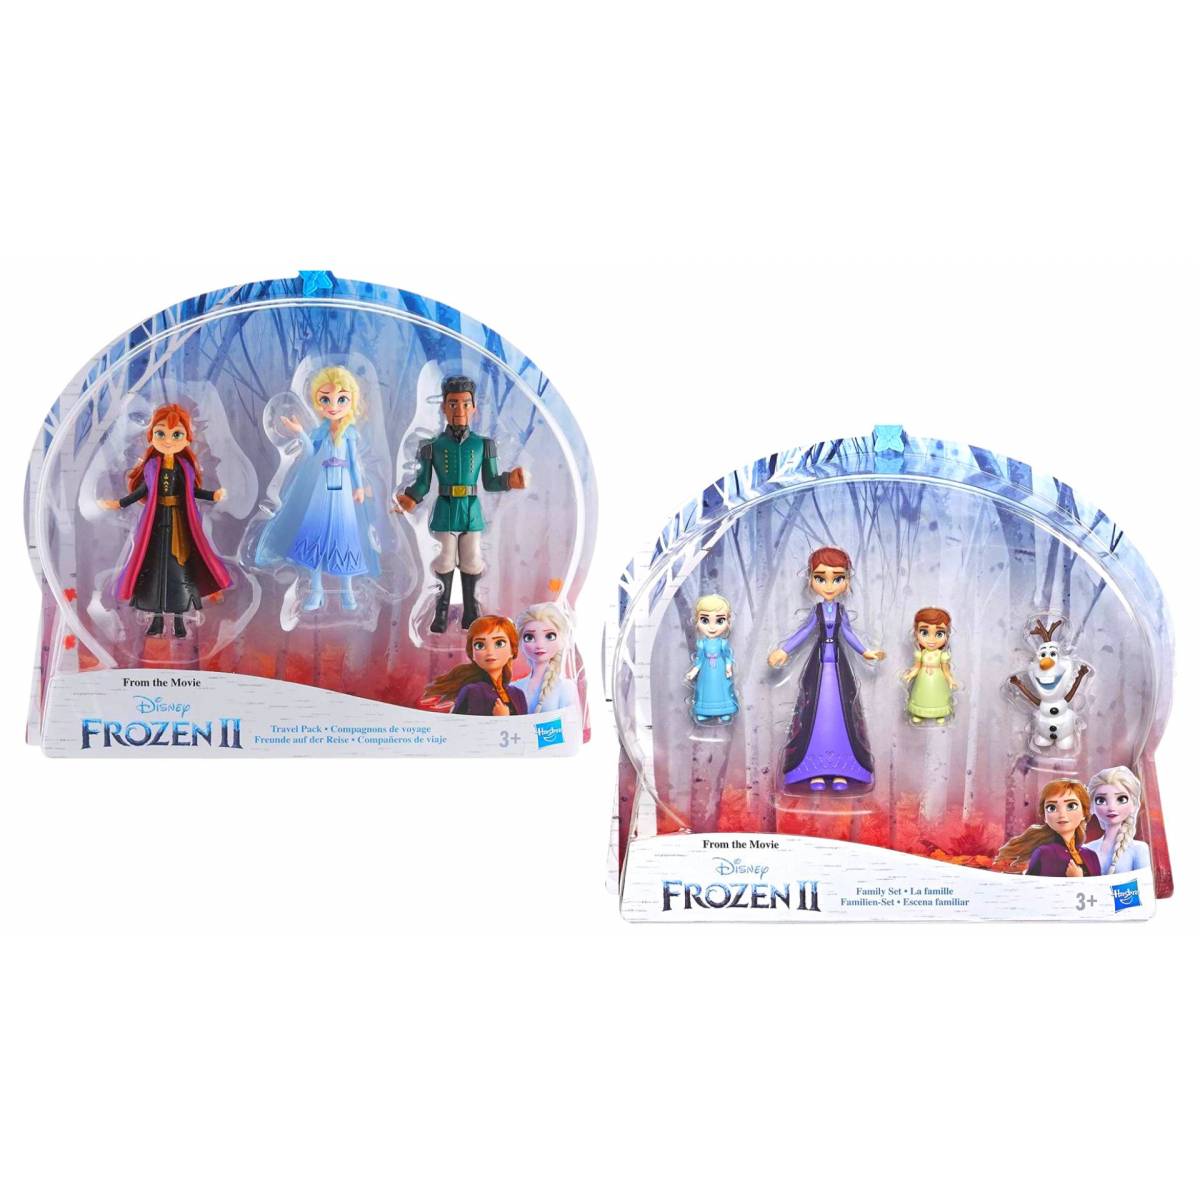 Pack of 2 Frozen 2 family & companions box set